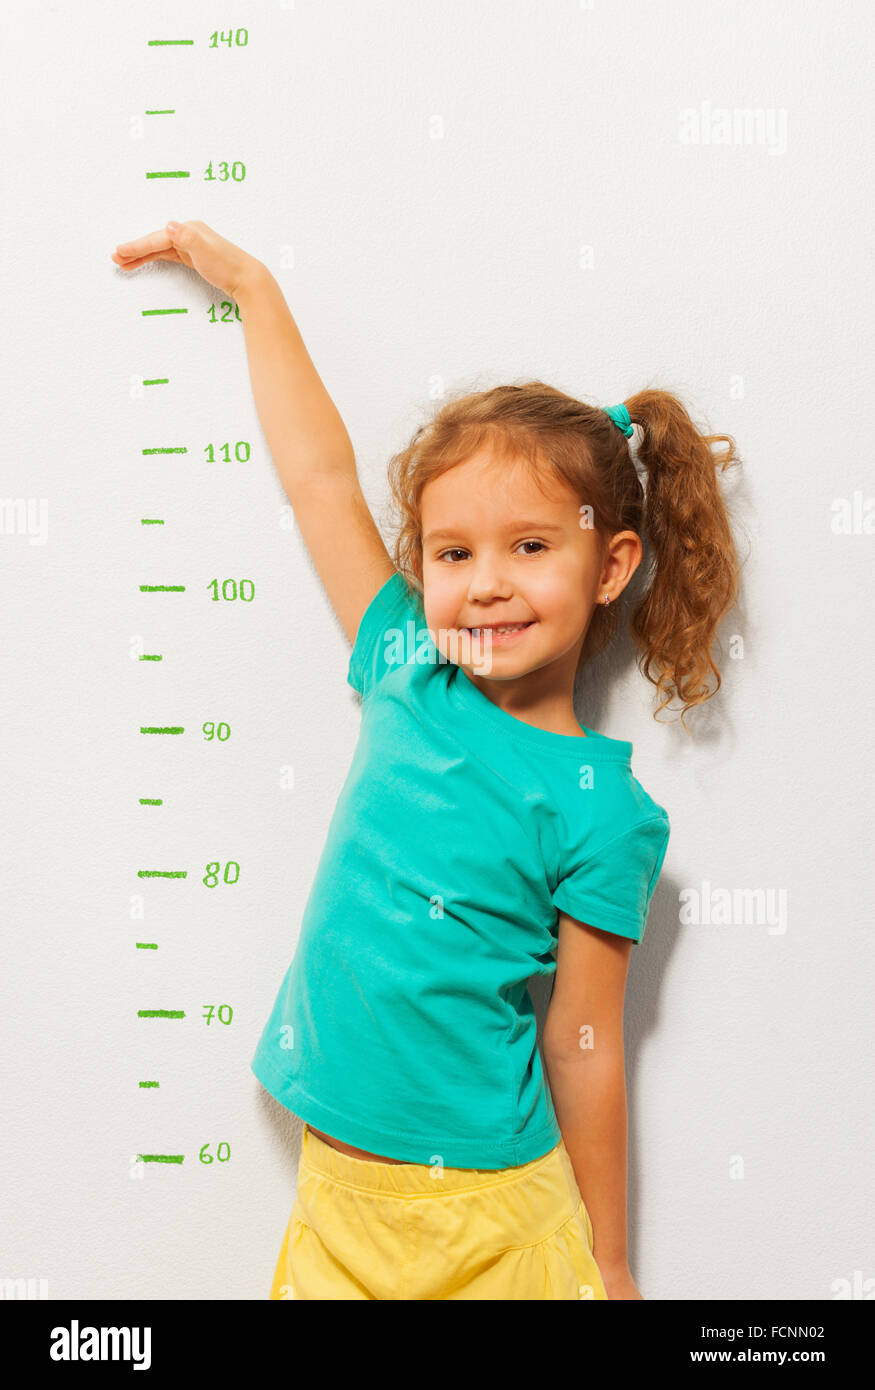 Child height measurement - Stock Image - F002/5315 - Science Photo Library